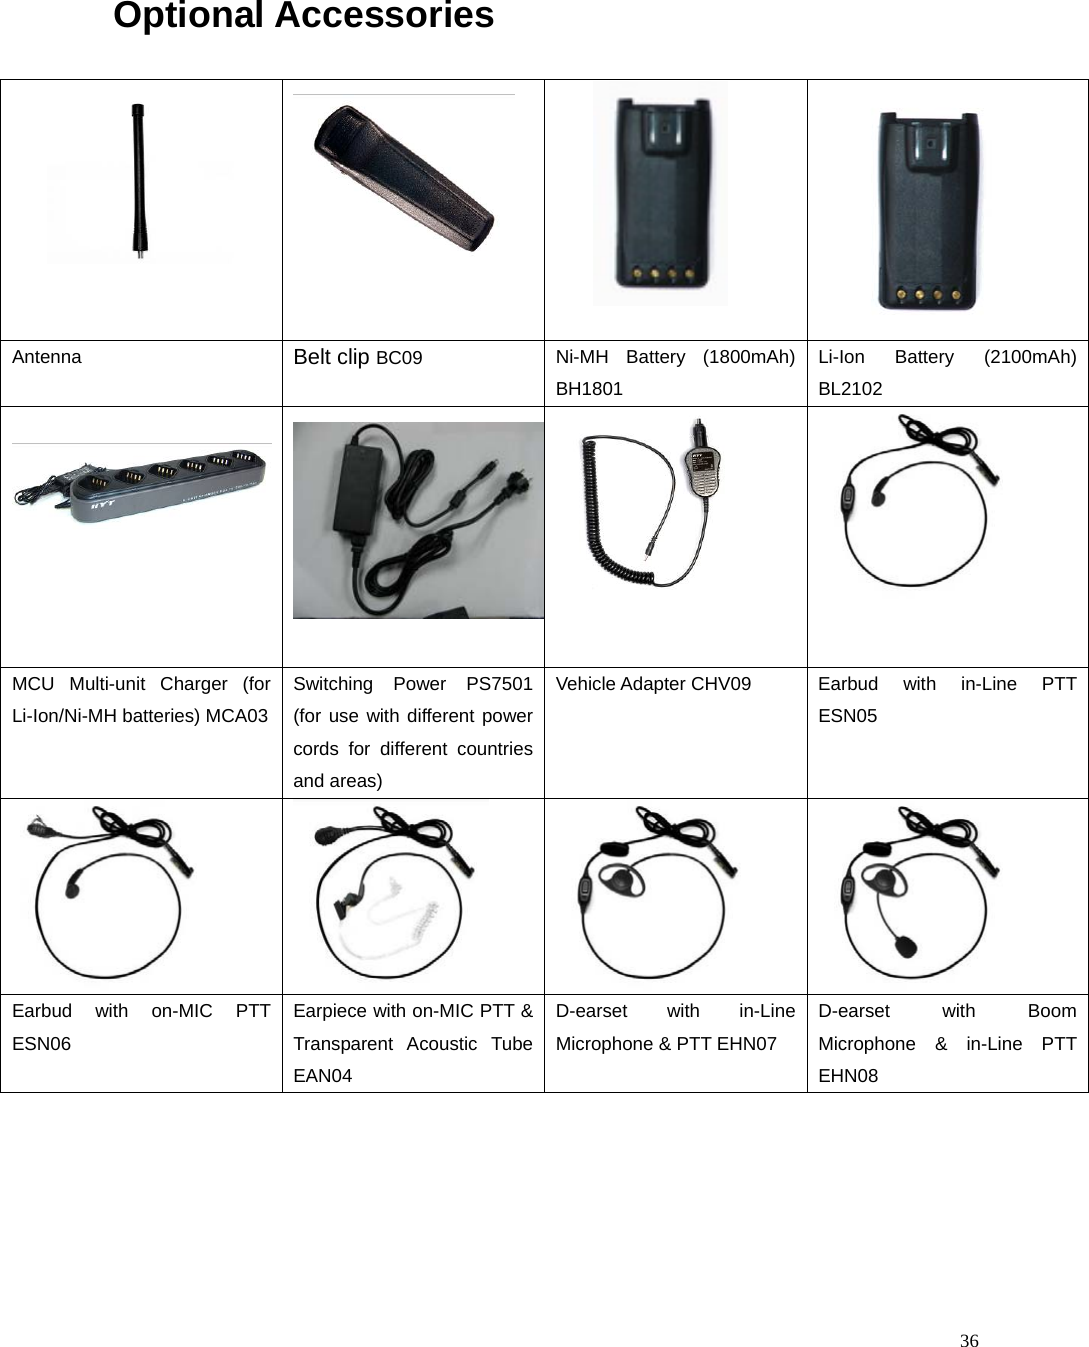   36   Optional Accessories      Antenna  Belt clip BC09  Ni-MH Battery (1800mAh) BH1801 Li-Ion Battery (2100mAh) BL2102      MCU Multi-unit Charger (for Li-Ion/Ni-MH batteries) MCA03 Switching Power PS7501 (for use with different power cords for different countries and areas) Vehicle Adapter CHV09  Earbud with in-Line PTT ESN05        Earbud with on-MIC PTT ESN06 Earpiece with on-MIC PTT &amp; Transparent Acoustic Tube EAN04 D-earset with in-Line Microphone &amp; PTT EHN07 D-earset with Boom Microphone &amp; in-Line PTT EHN08 